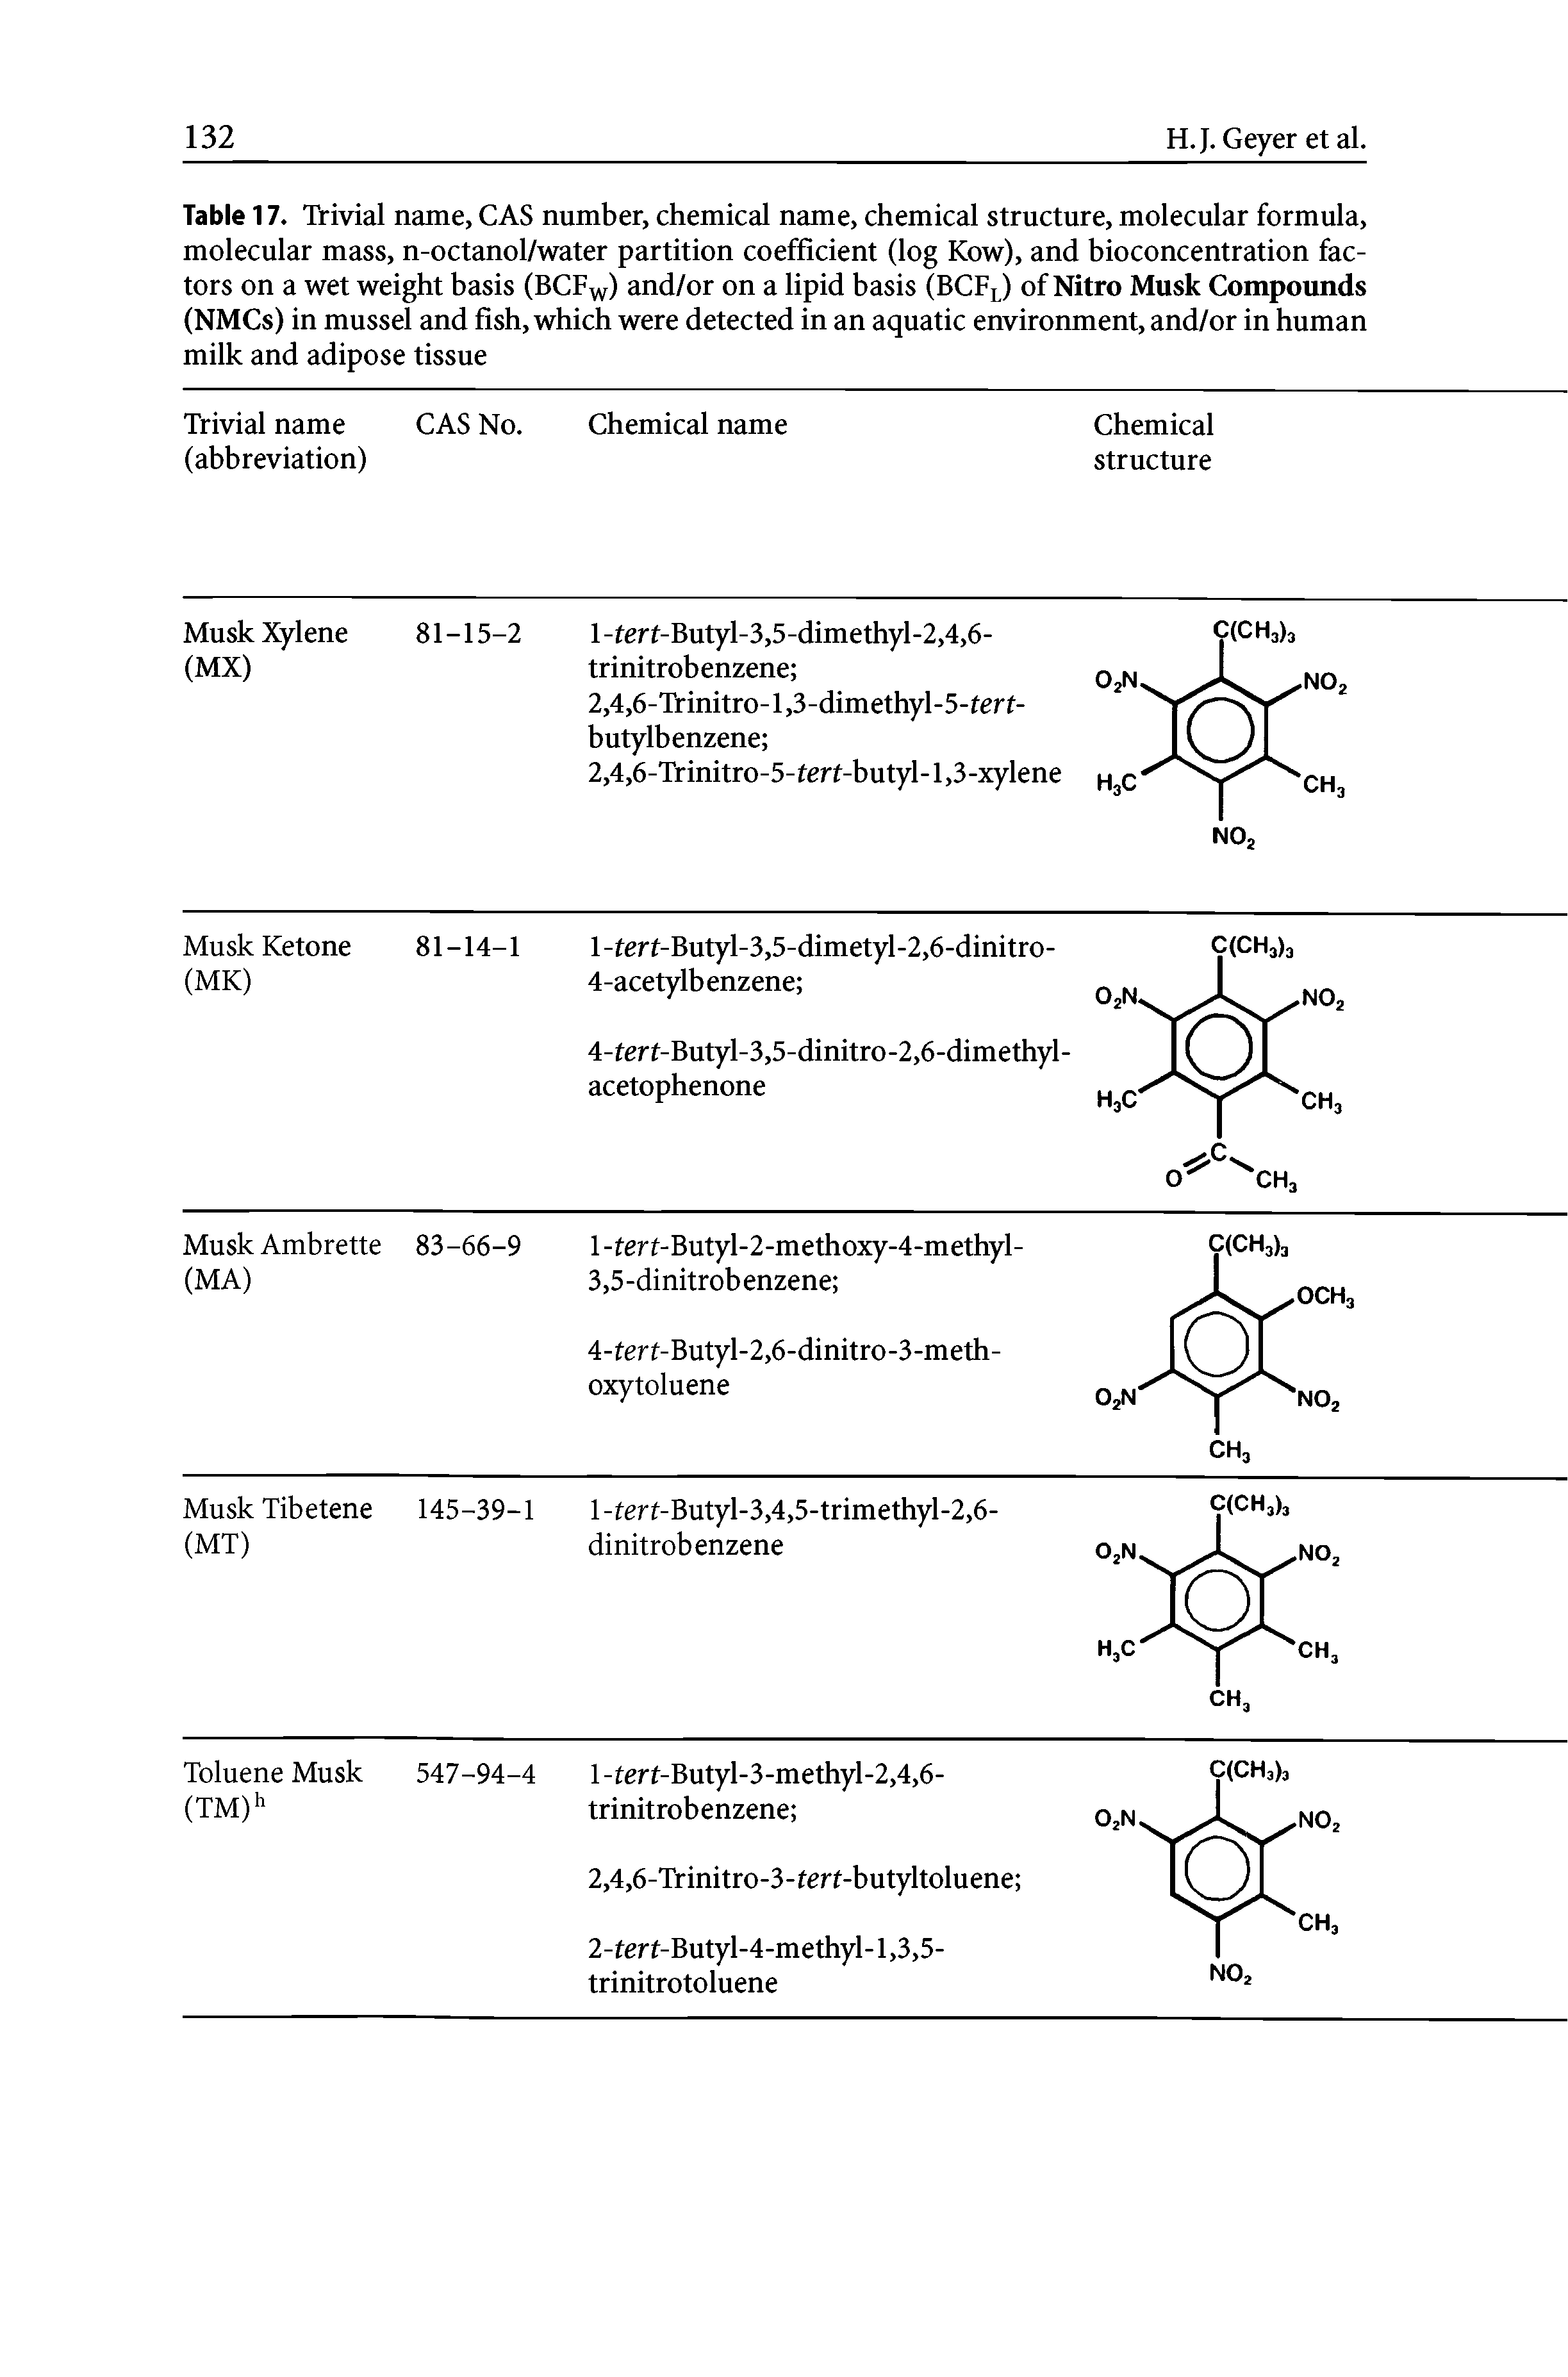 Table 17. Trivial name, CAS number, chemical name, chemical structure, molecular formula, molecular mass, n-octanol/water partition coefficient (log Kow), and bioconcentration factors on a wet weight basis (BCF ) and/or on a lipid basis (BCFl) of Nitro Musk Compounds (NMCs) in mussel and fish, which were detected in an aquatic environment, and/or in human milk and adipose tissue...